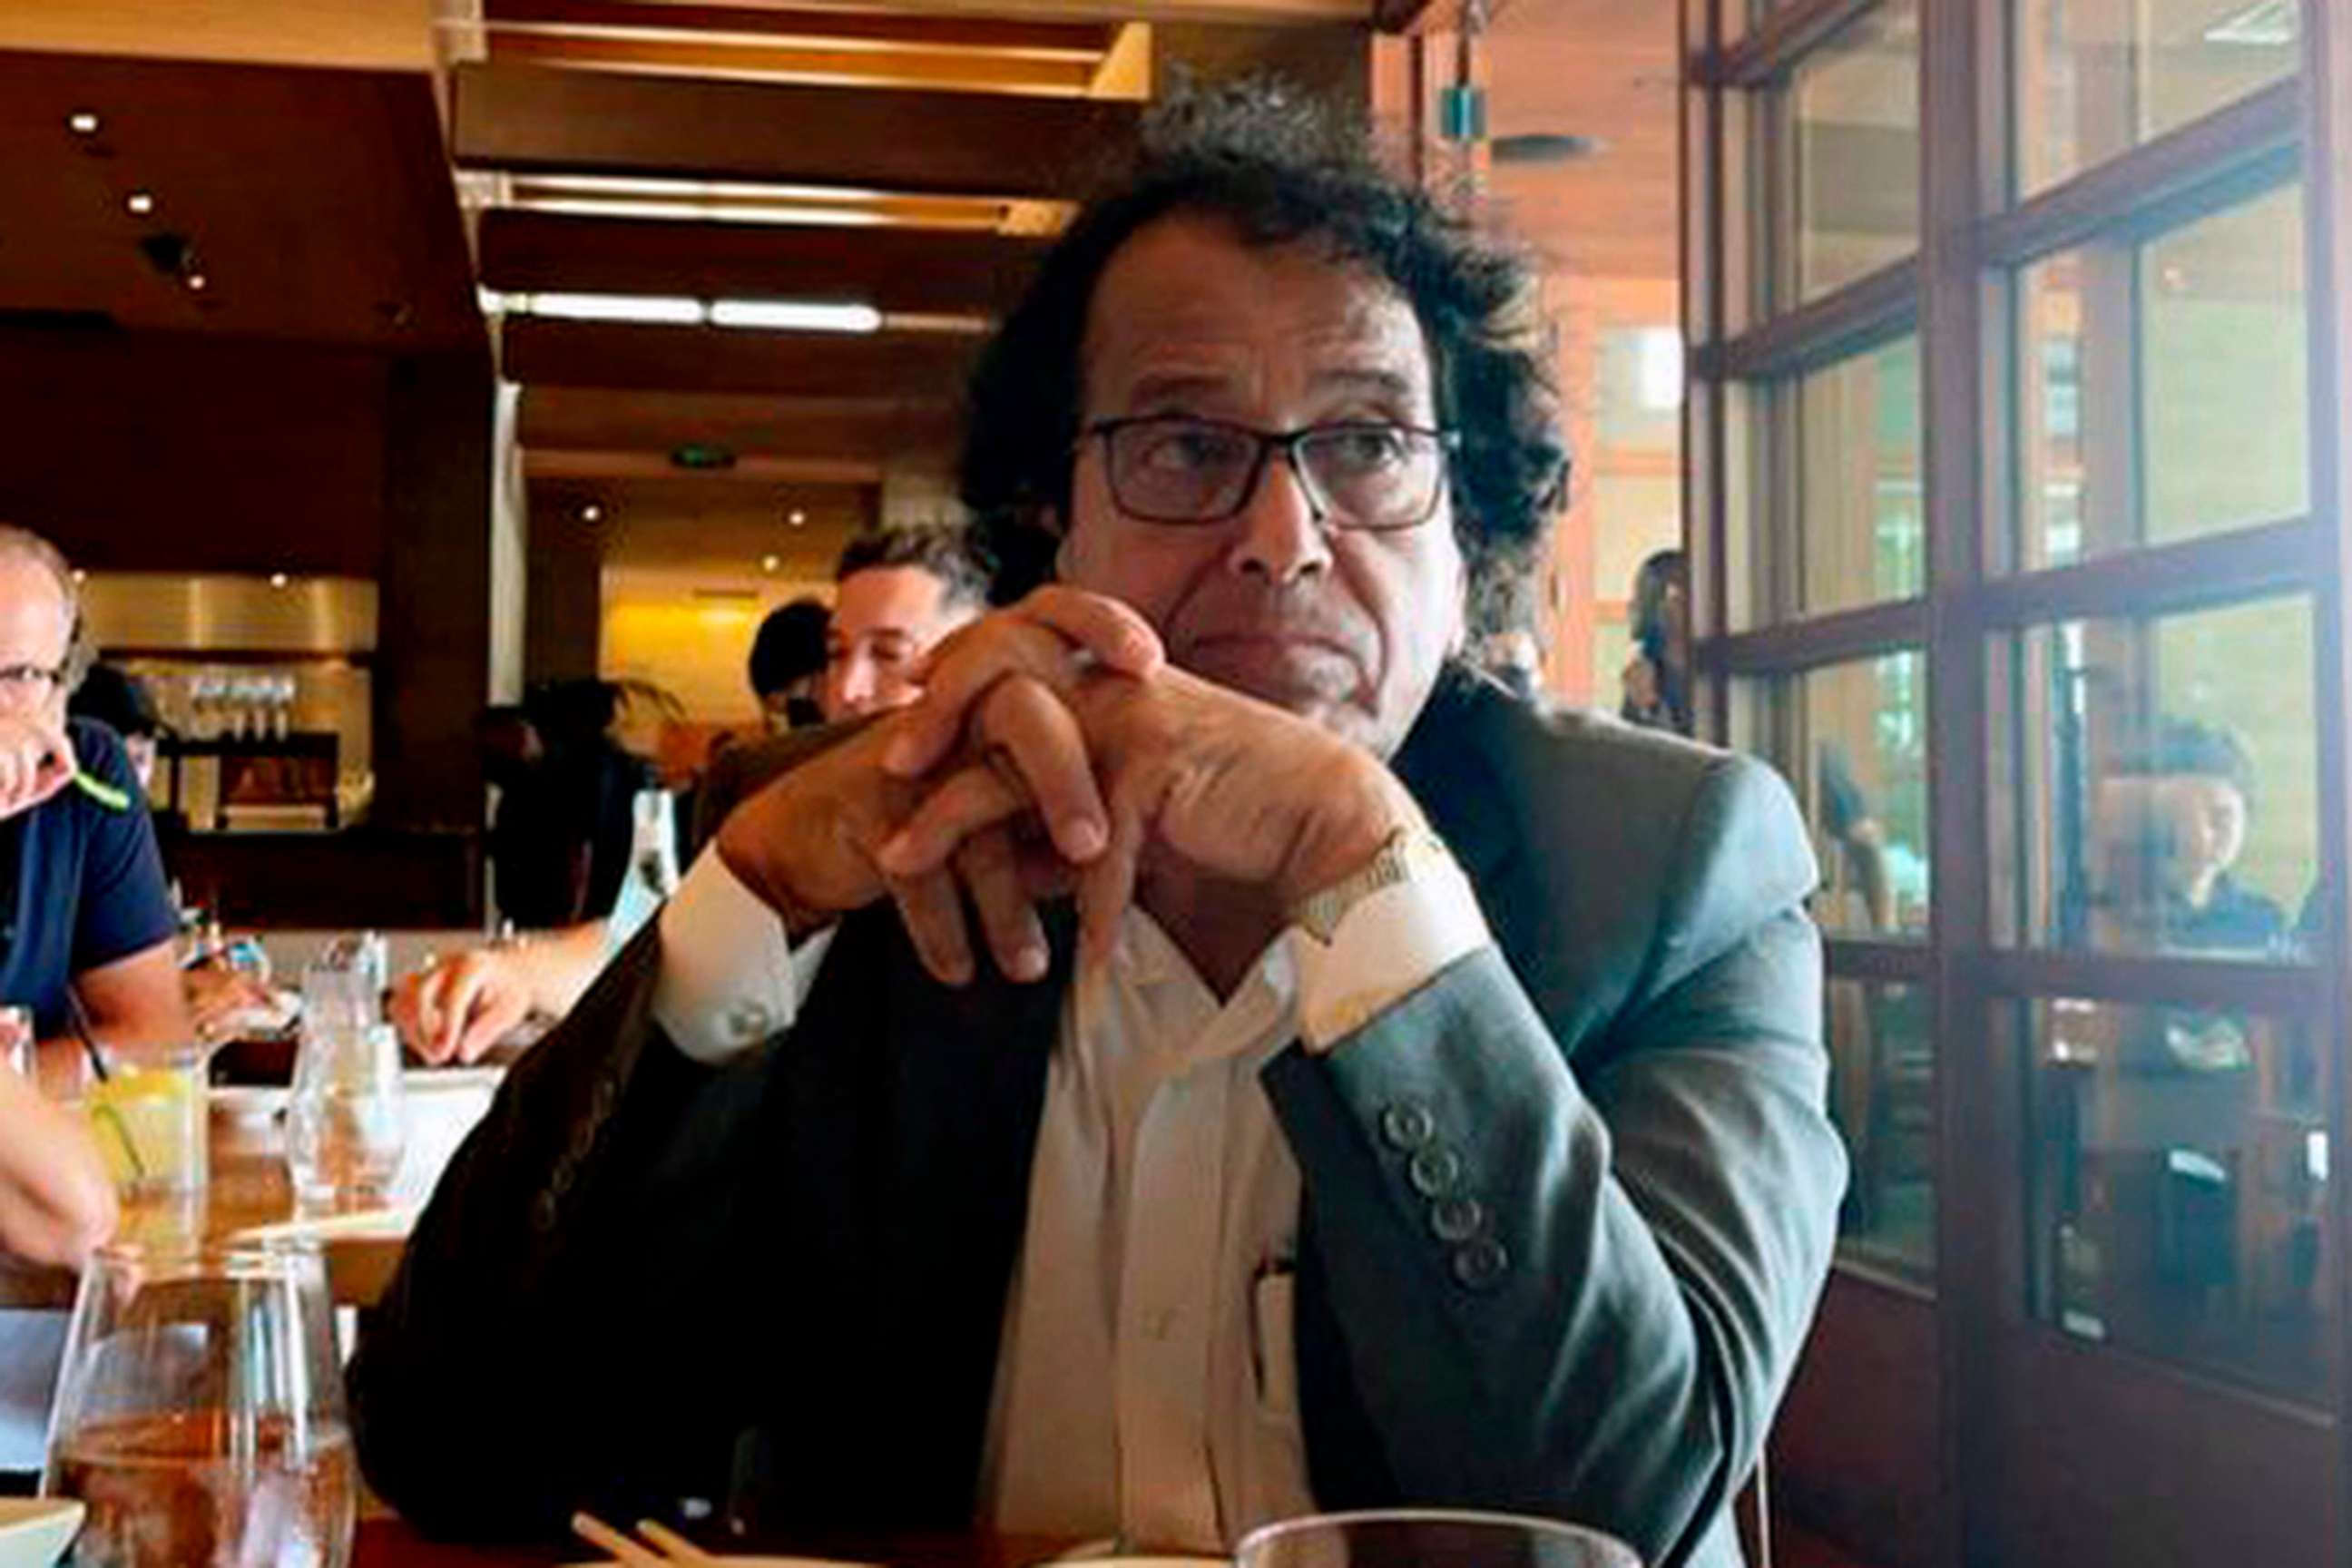 PHOTO: In this photo provided by Ibrahim Almadi, Saad Ibrahim Almadi sits in a restaurant in an unidentified place, in the United States, on August 2021. Almadi, 72, who is a citizen of both Saudi Arabia and the U.S., was arrested in Saudi Arabia.